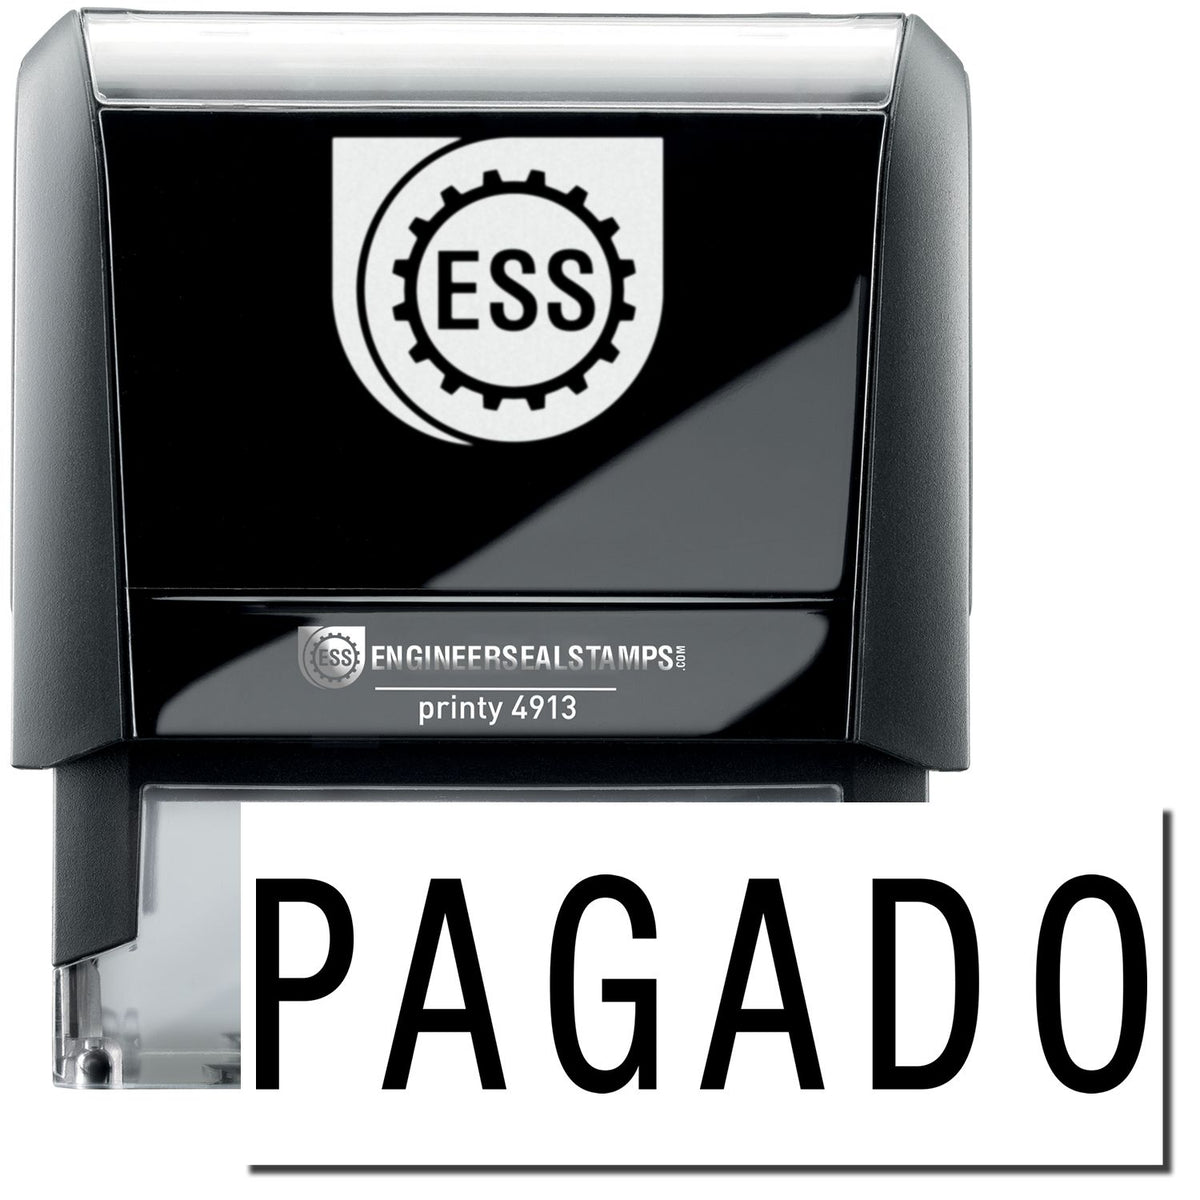 A self-inking stamp with a stamped image showing how the text &quot;PAGADO&quot; in a large font is displayed by it after stamping.